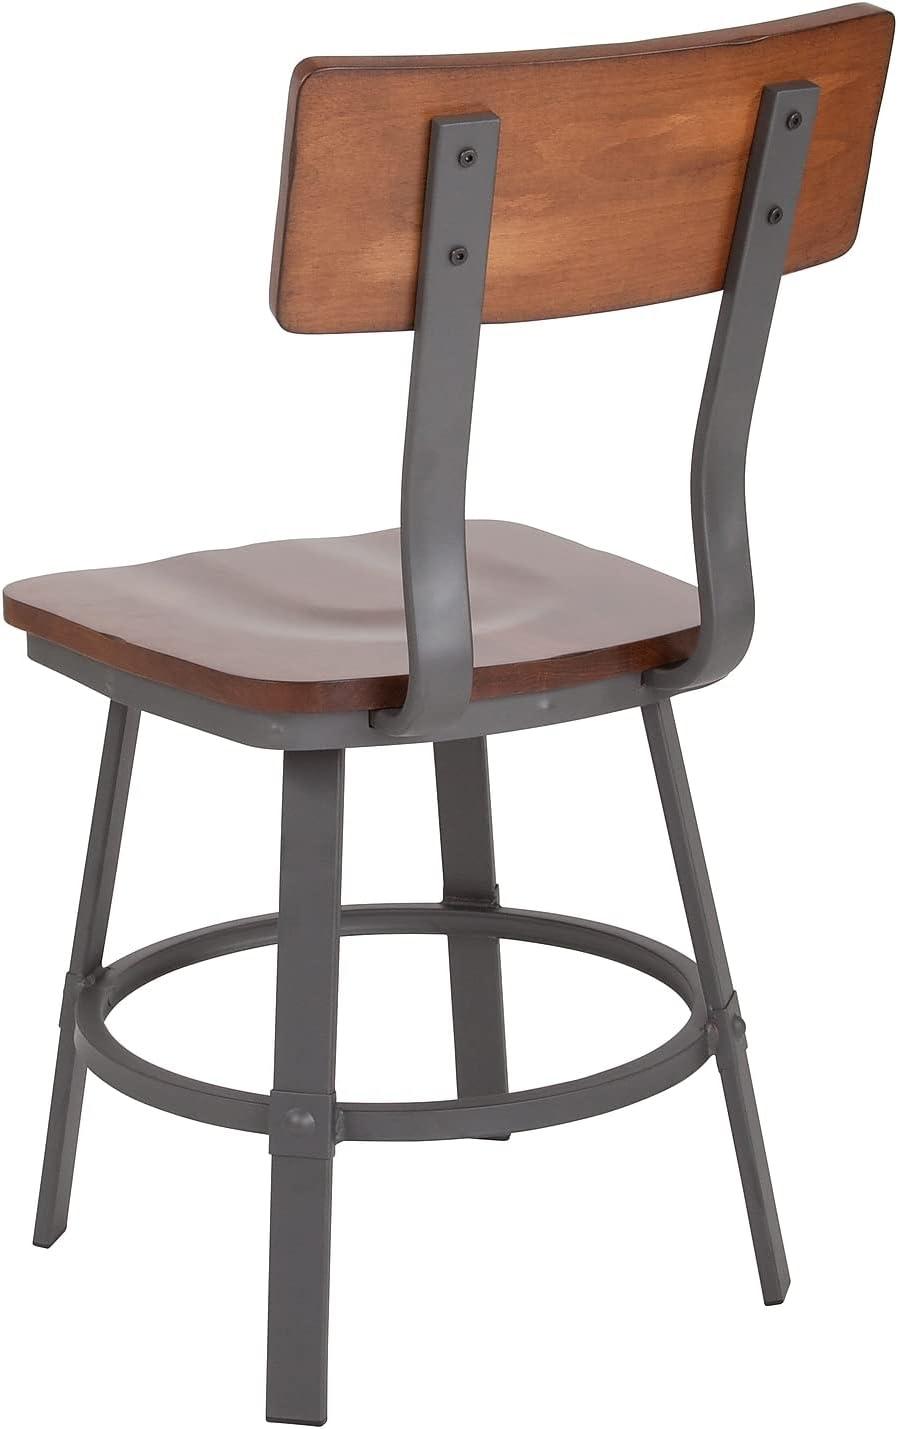 Modern-Industrial Gray Steel Side Chair with Rustic Walnut Wood Seat